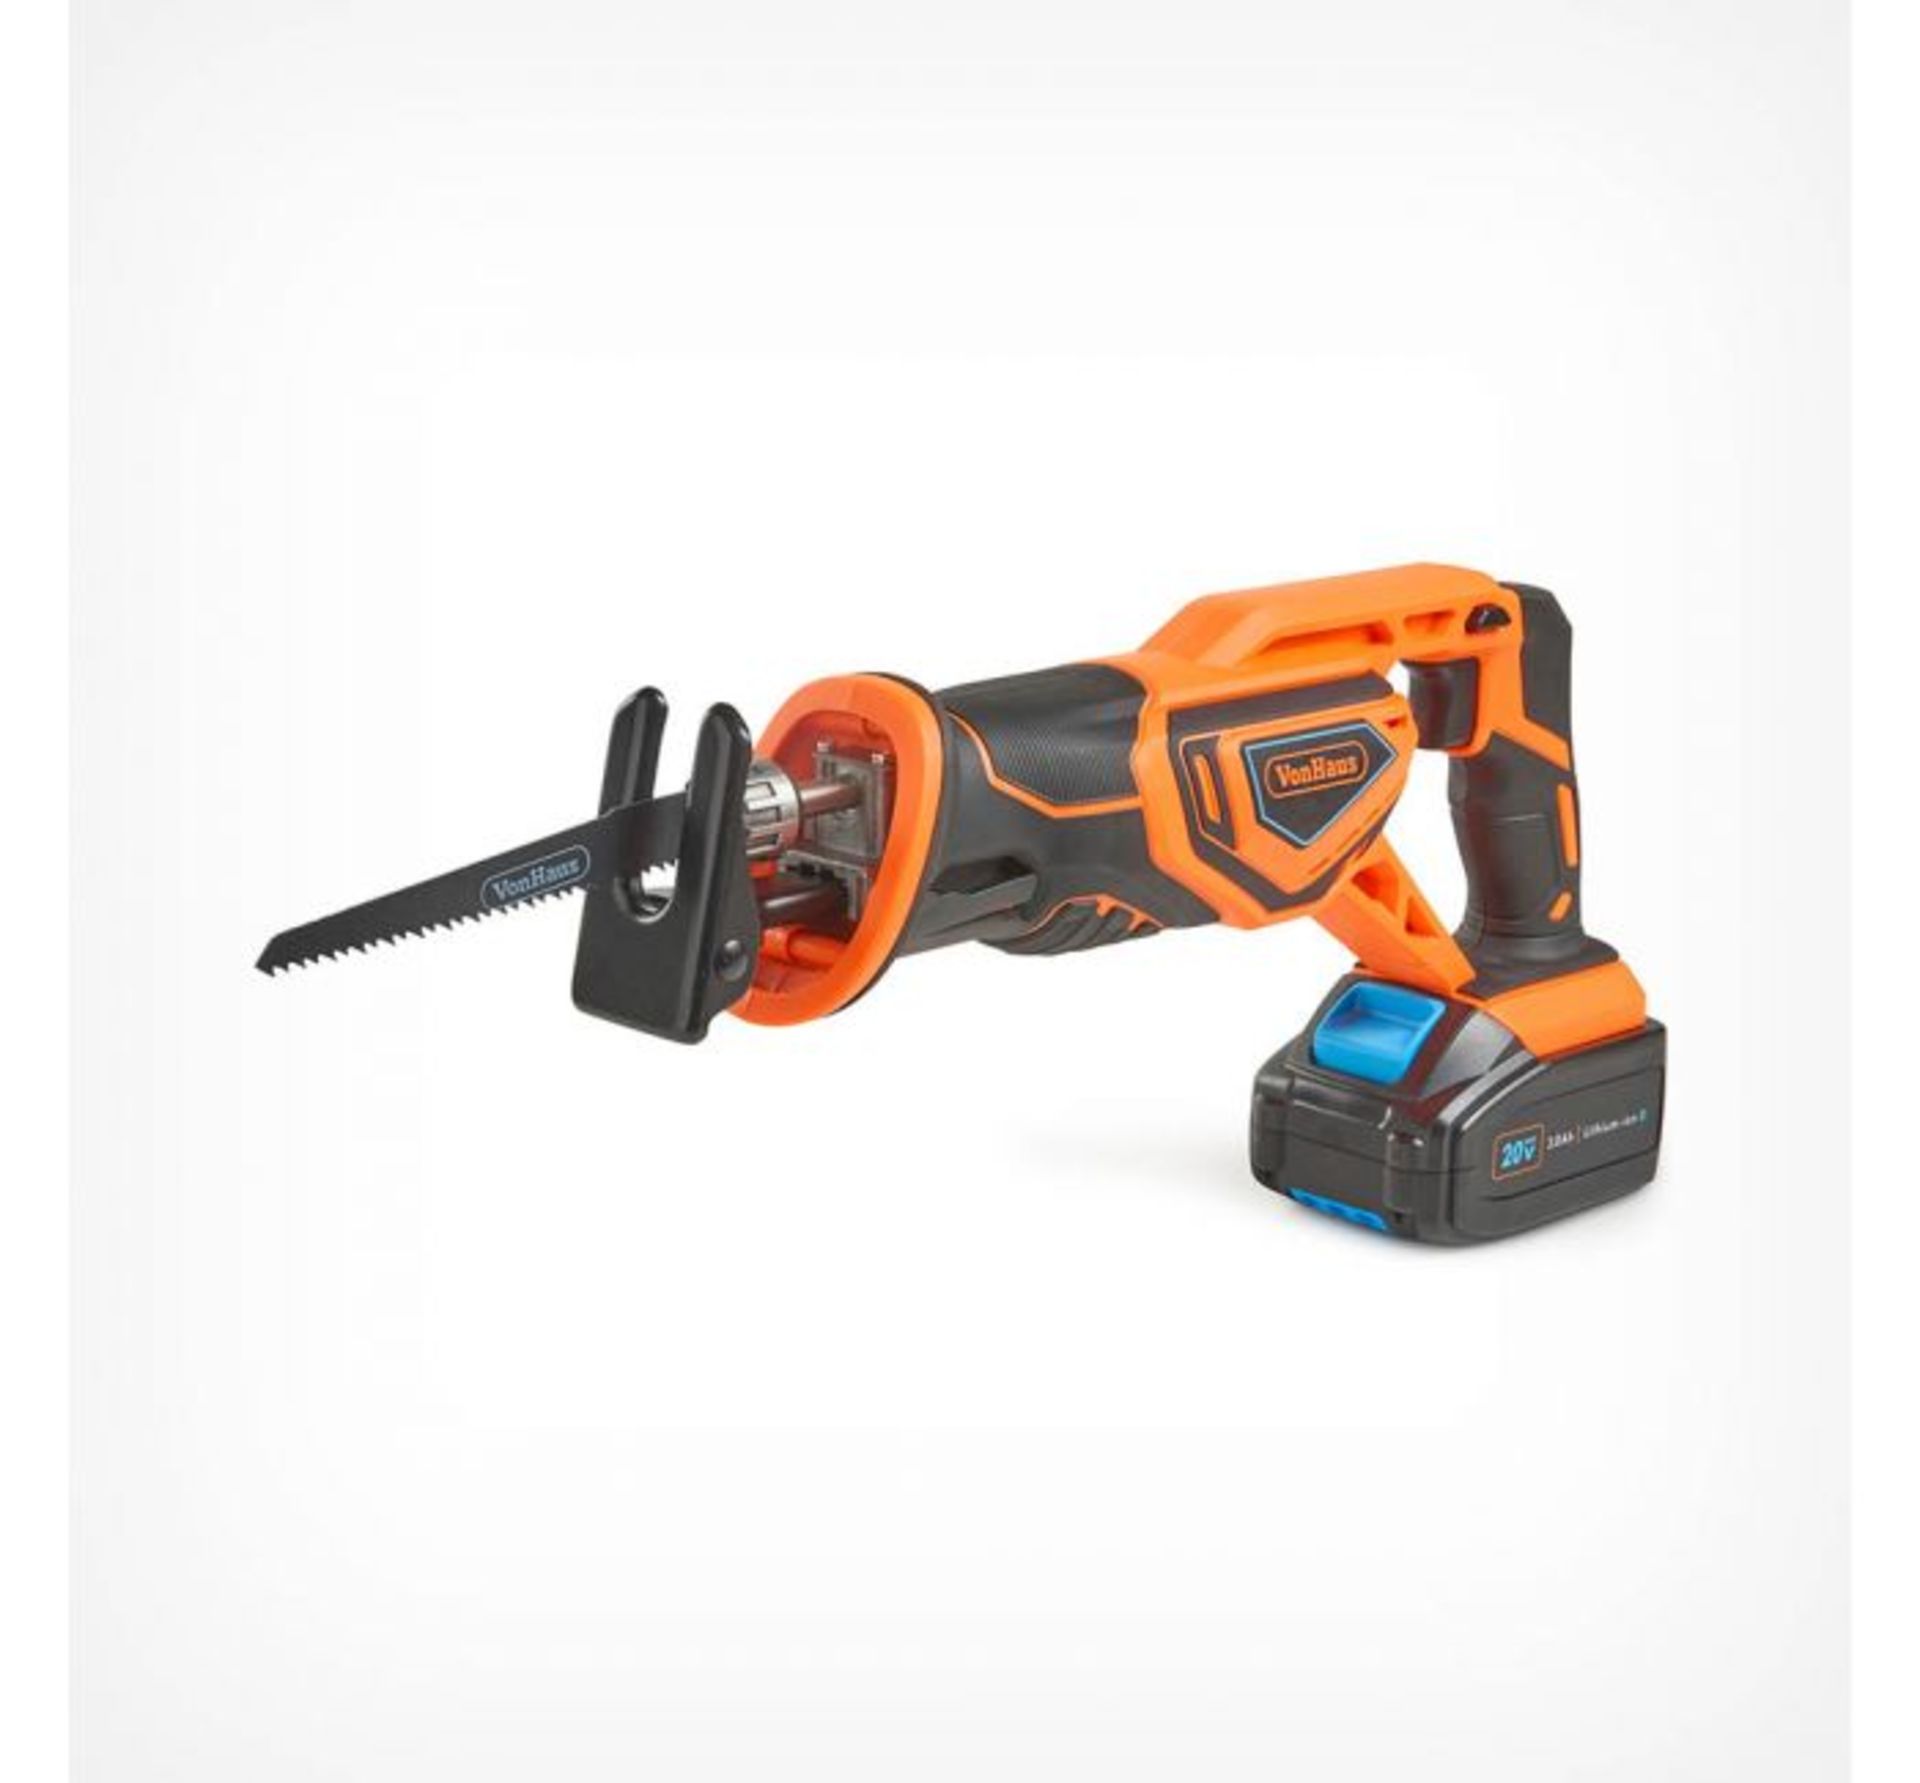 (F9) 20V MAX Reciprocating Saw 20V Max battery and no load operational speed of 0 – 2800 RPM... - Image 2 of 3